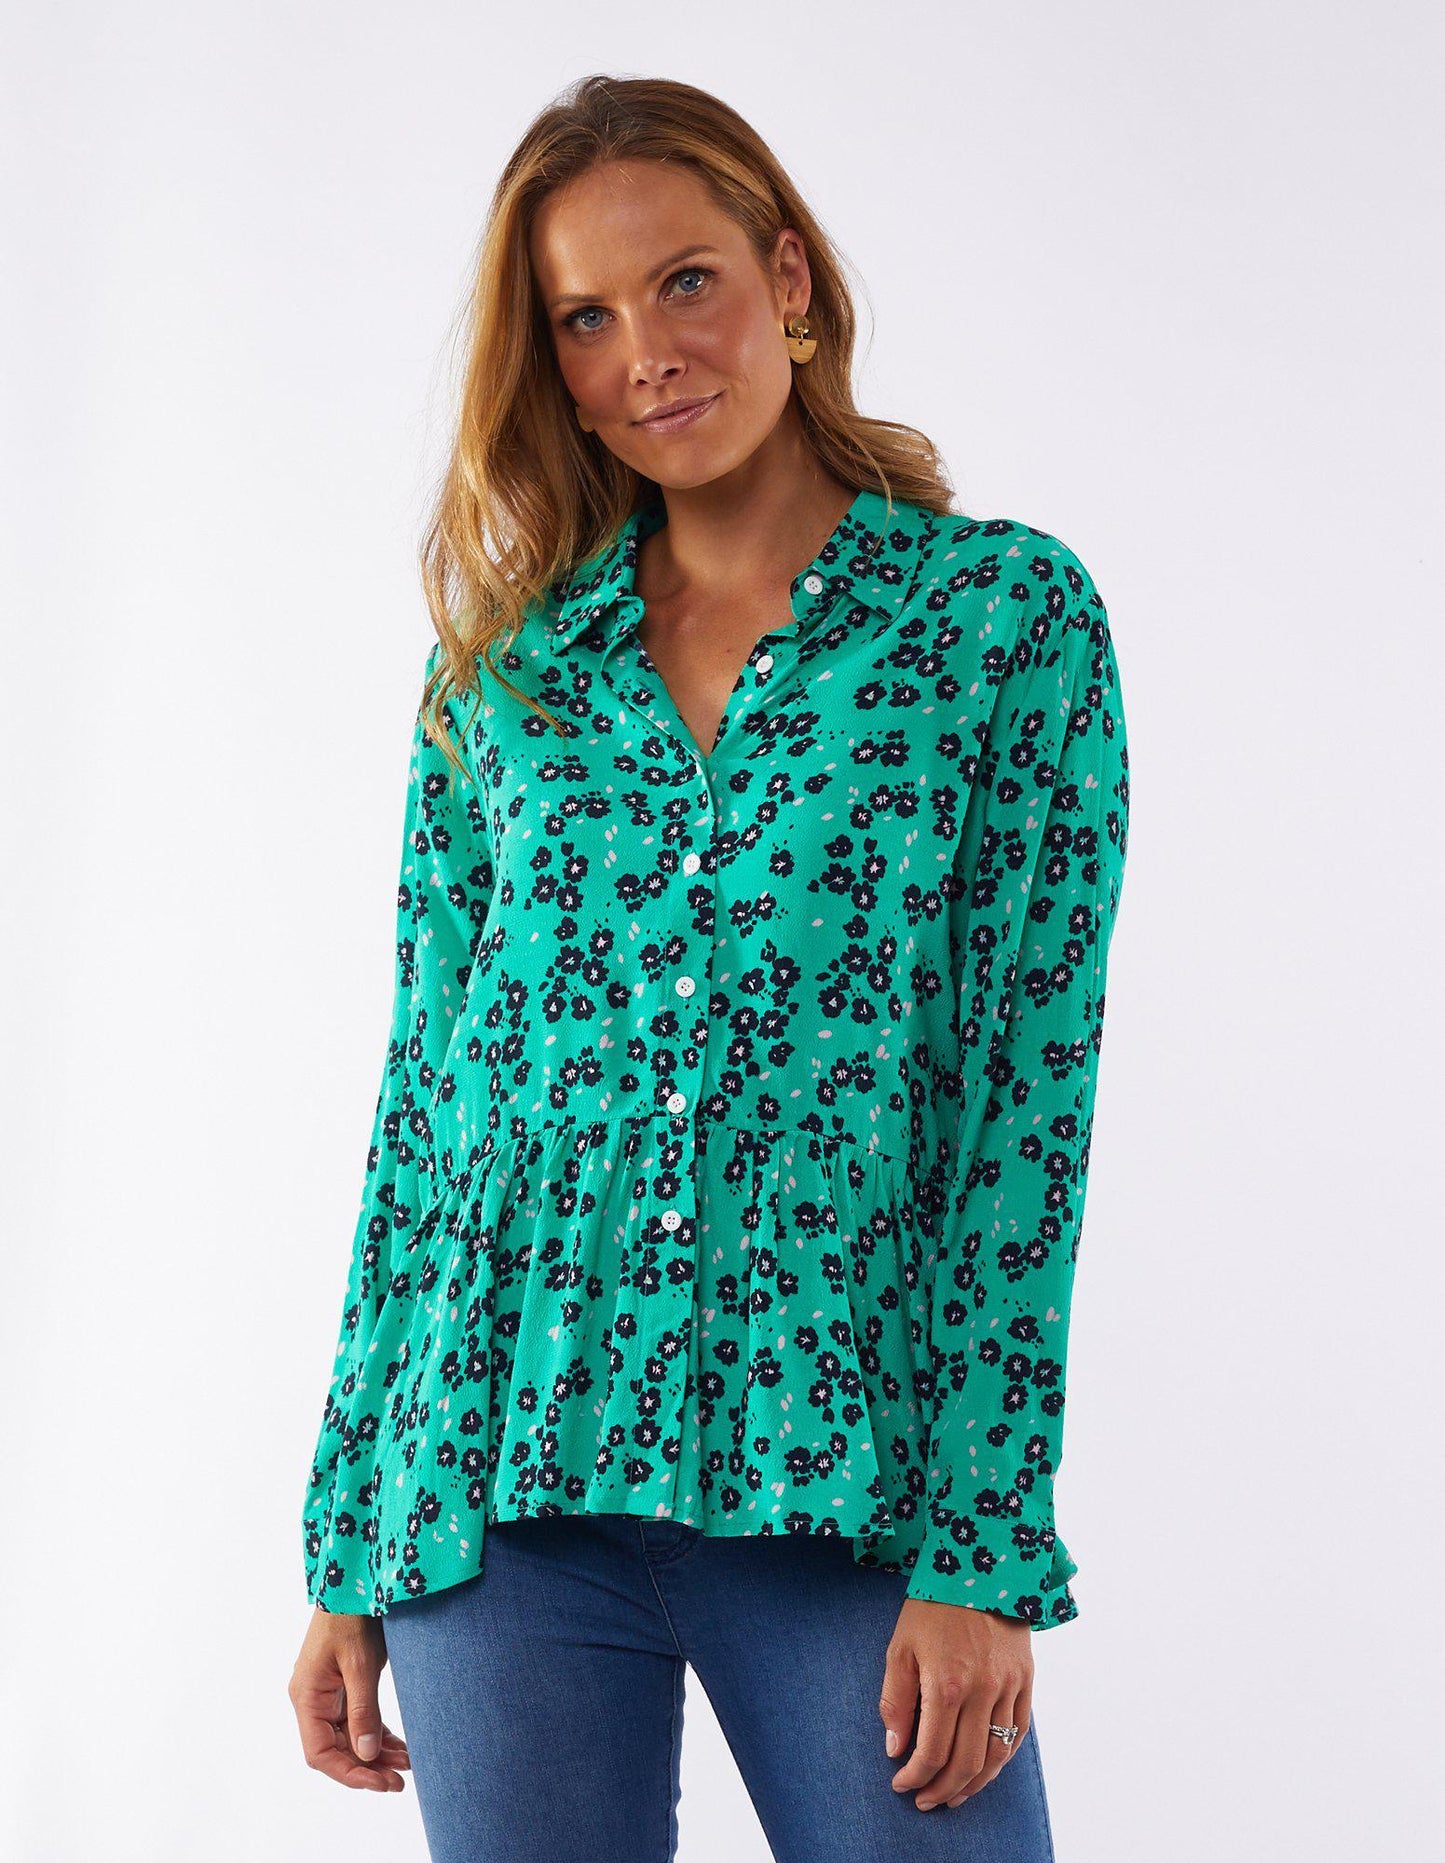 Eloise Floral Shirt - Green Floral – FUDGE Gifts Home Lifestyle